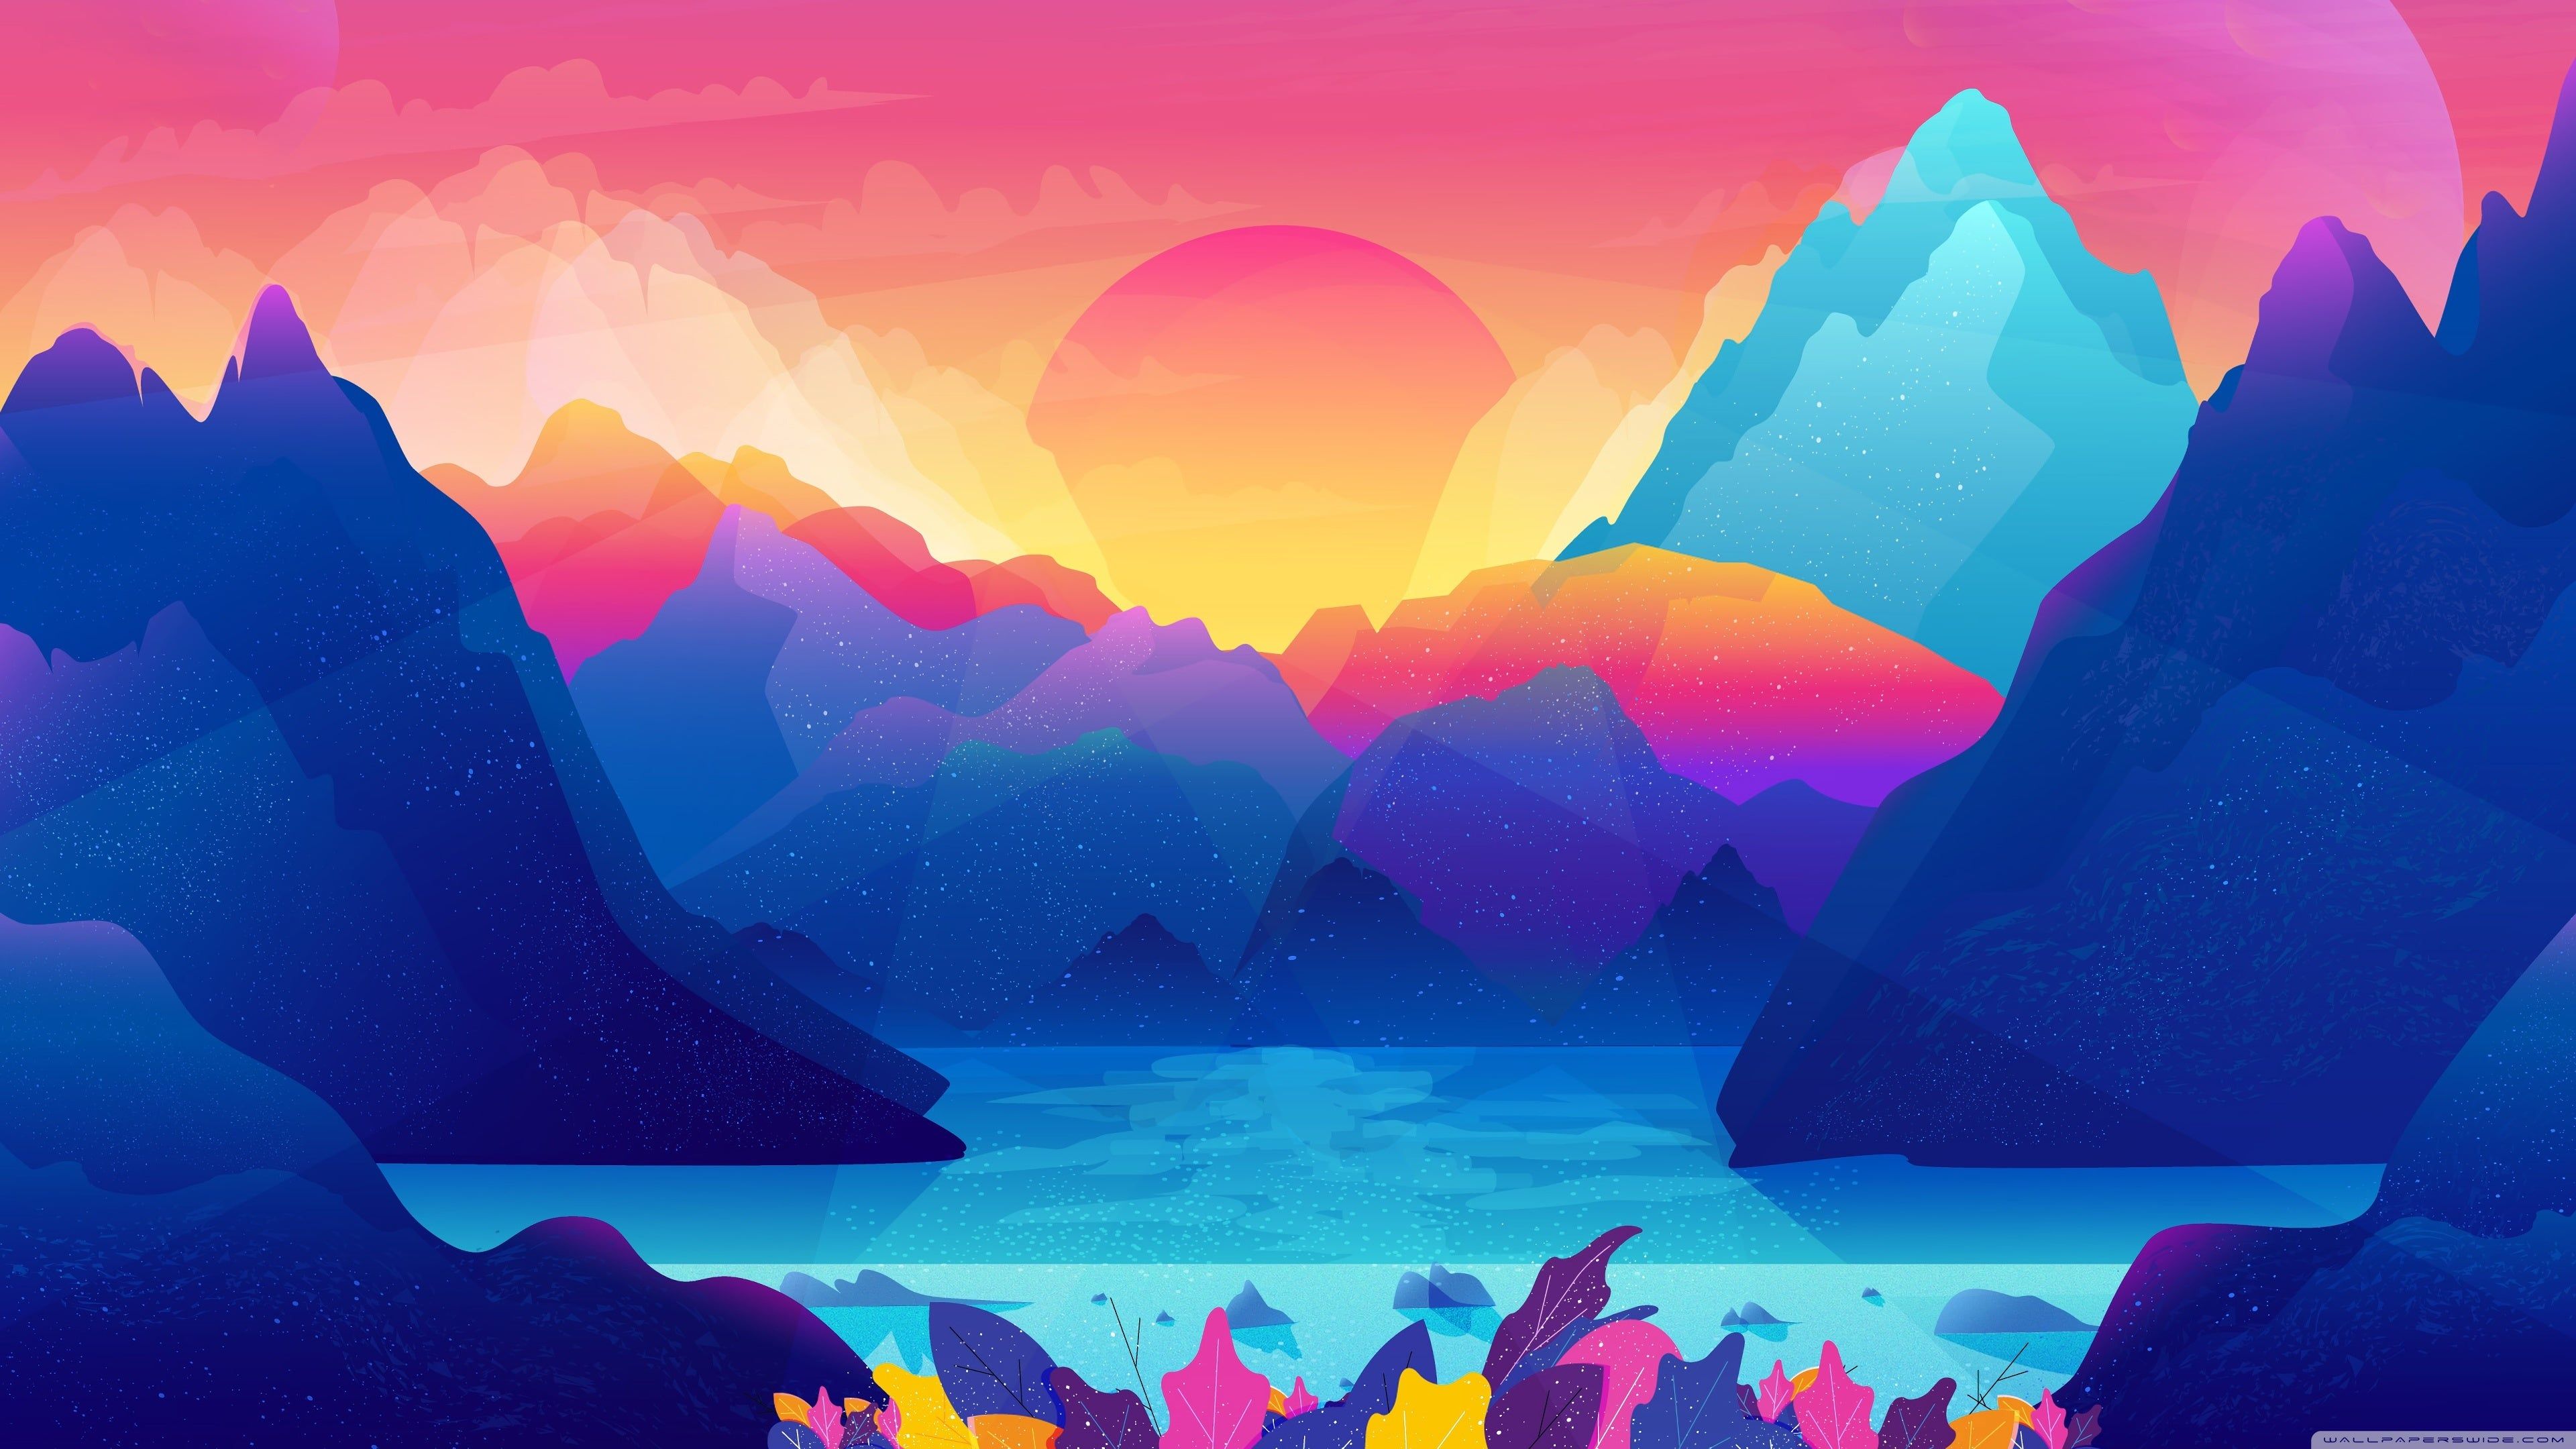 Colorful 4K wallpaper for your desktop or mobile screen free and easy to download